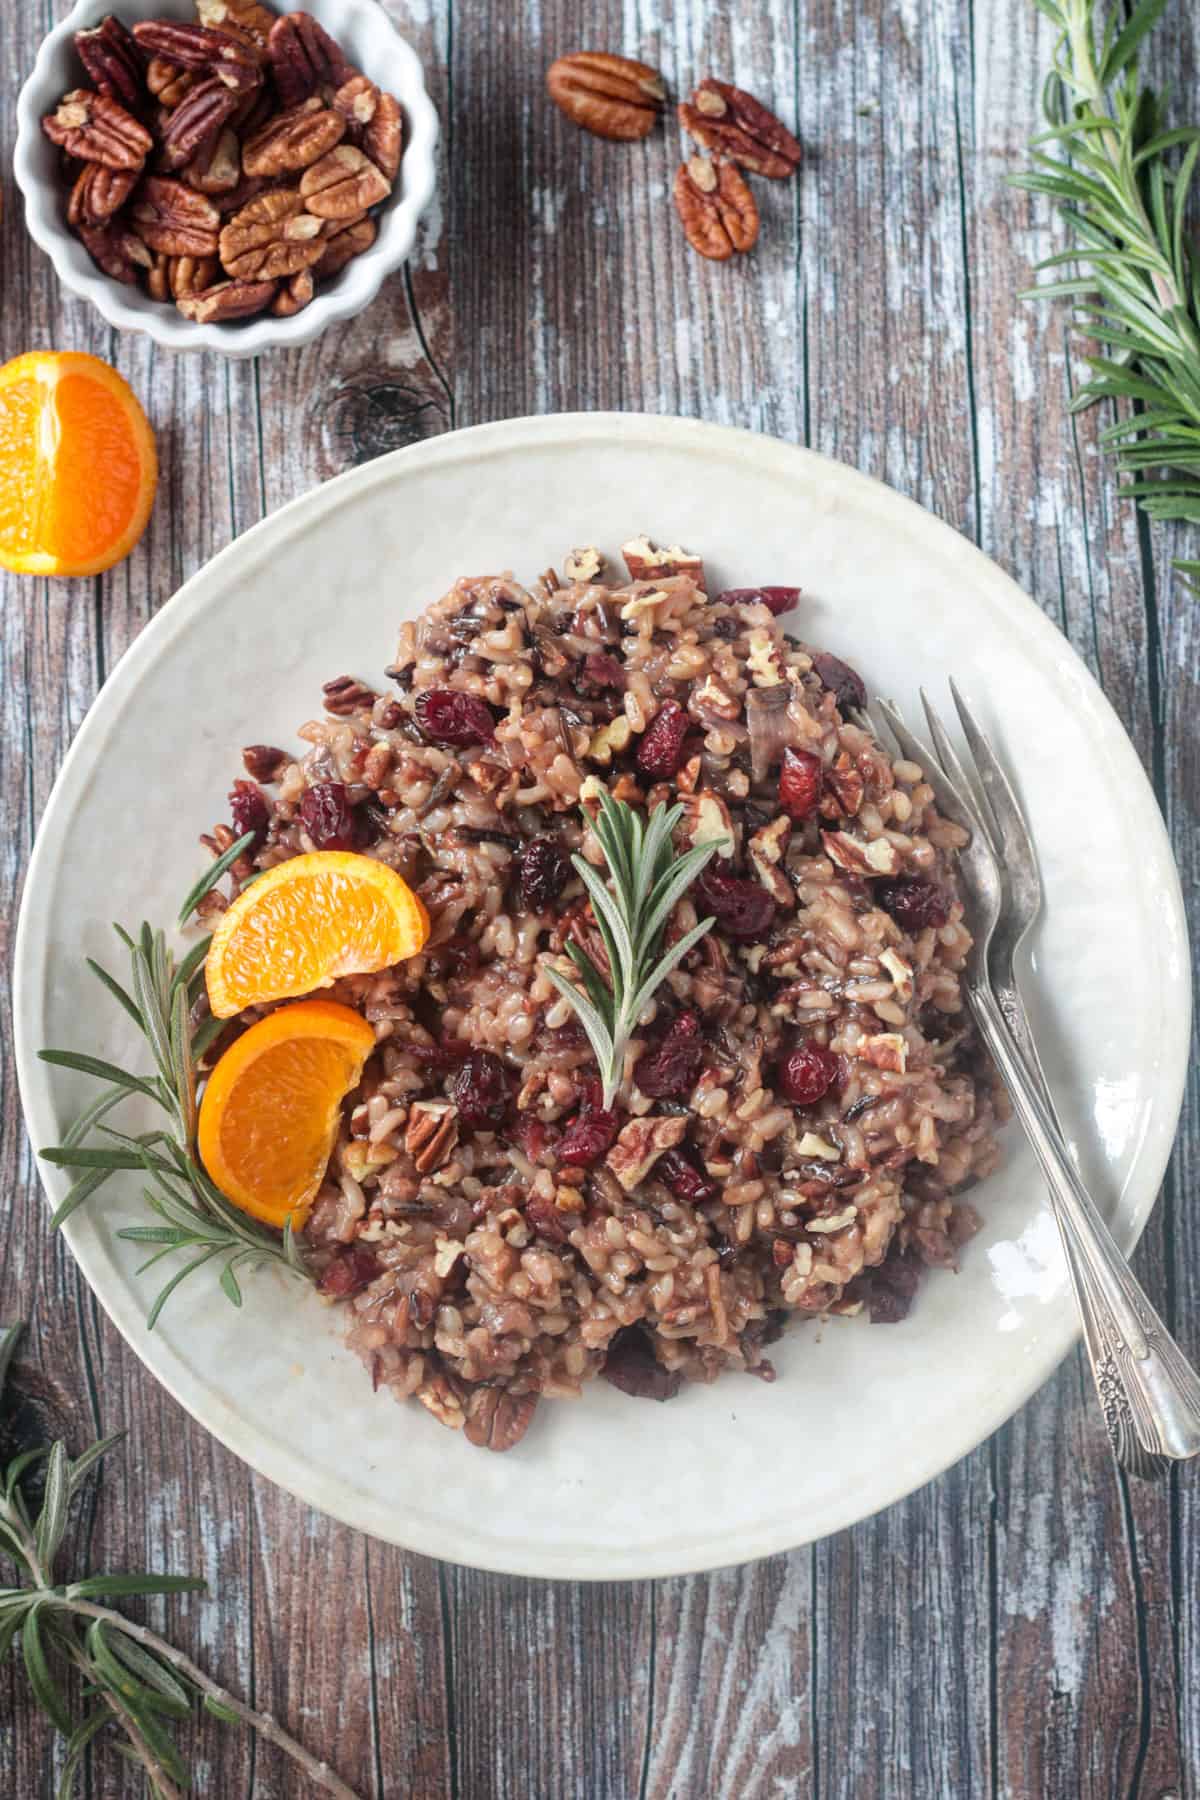 Thanksgiving rice with cranberries, citrus, and rosemary on a cream colored plate.